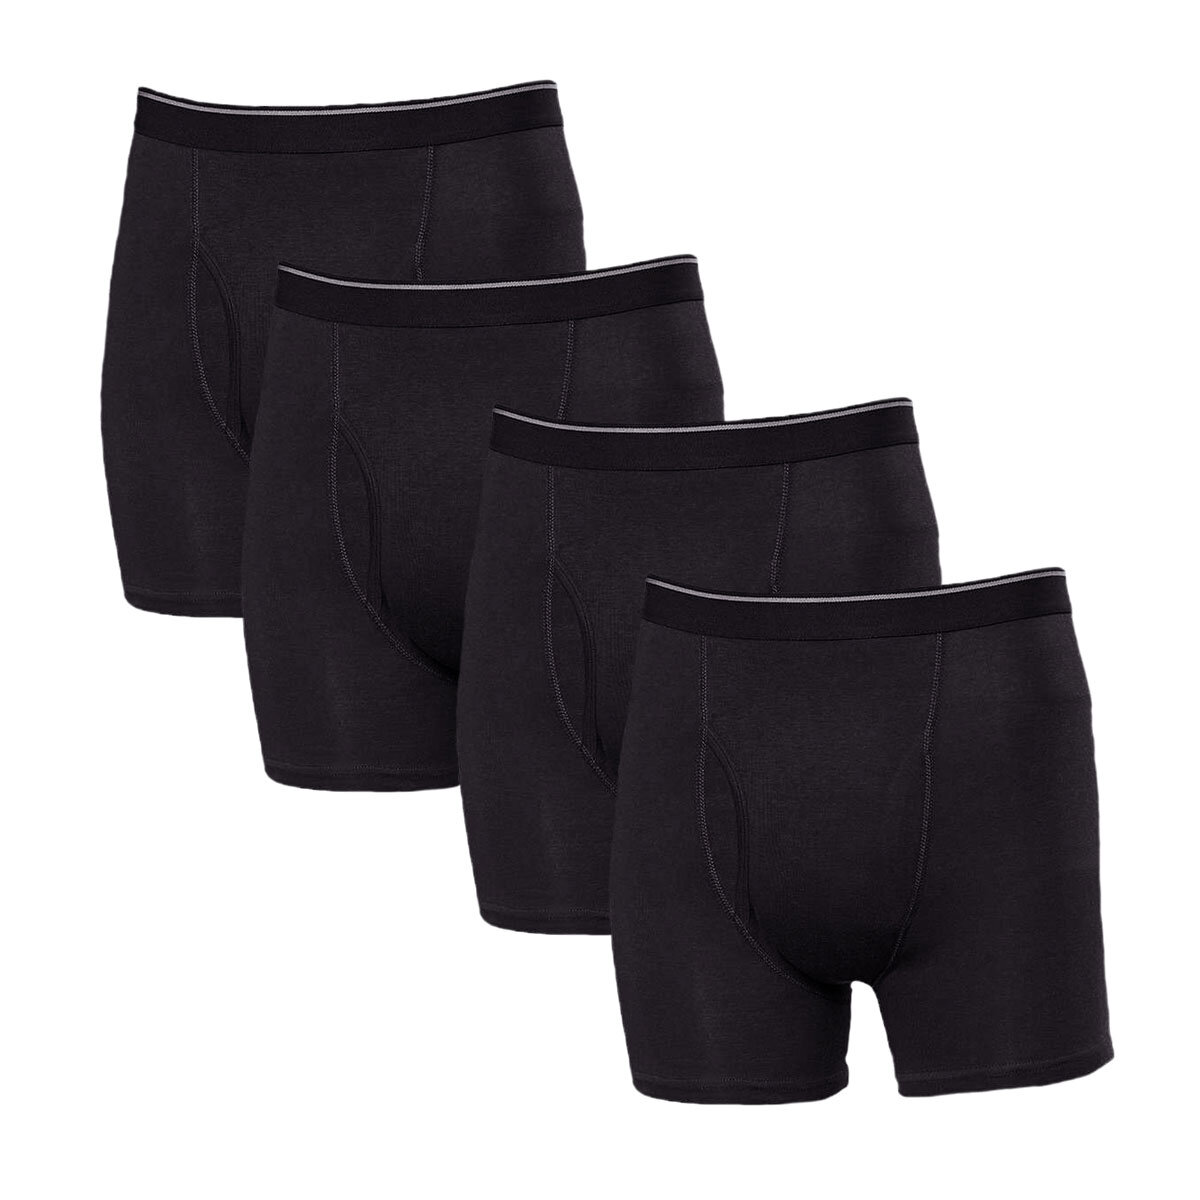 CALVIN KLEIN BOXERS 4 PACK +MENS SIZES S-XL at Costco McGillivray